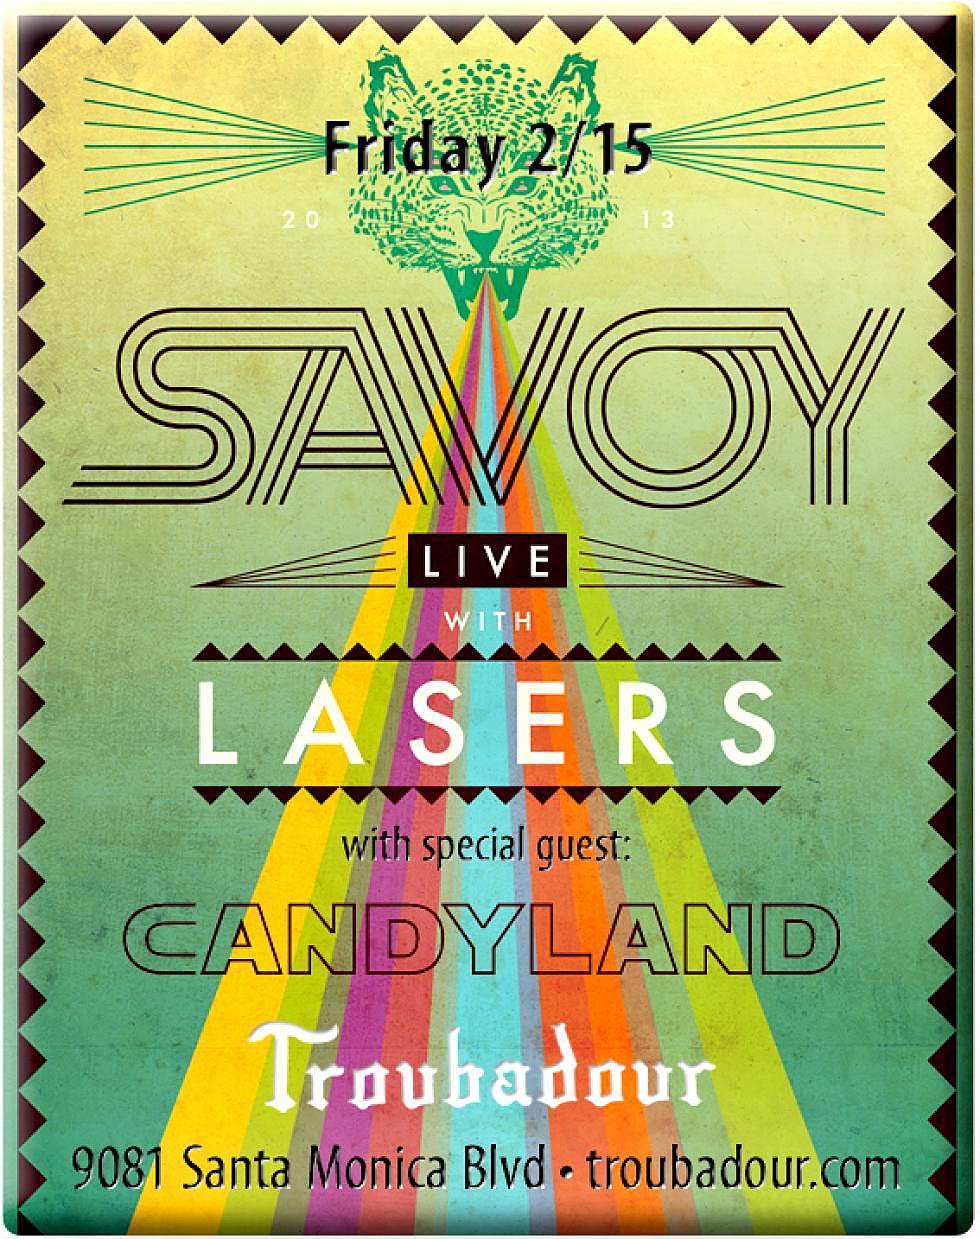 Savoy w/ Lasers Friday at the Troubadour in LA